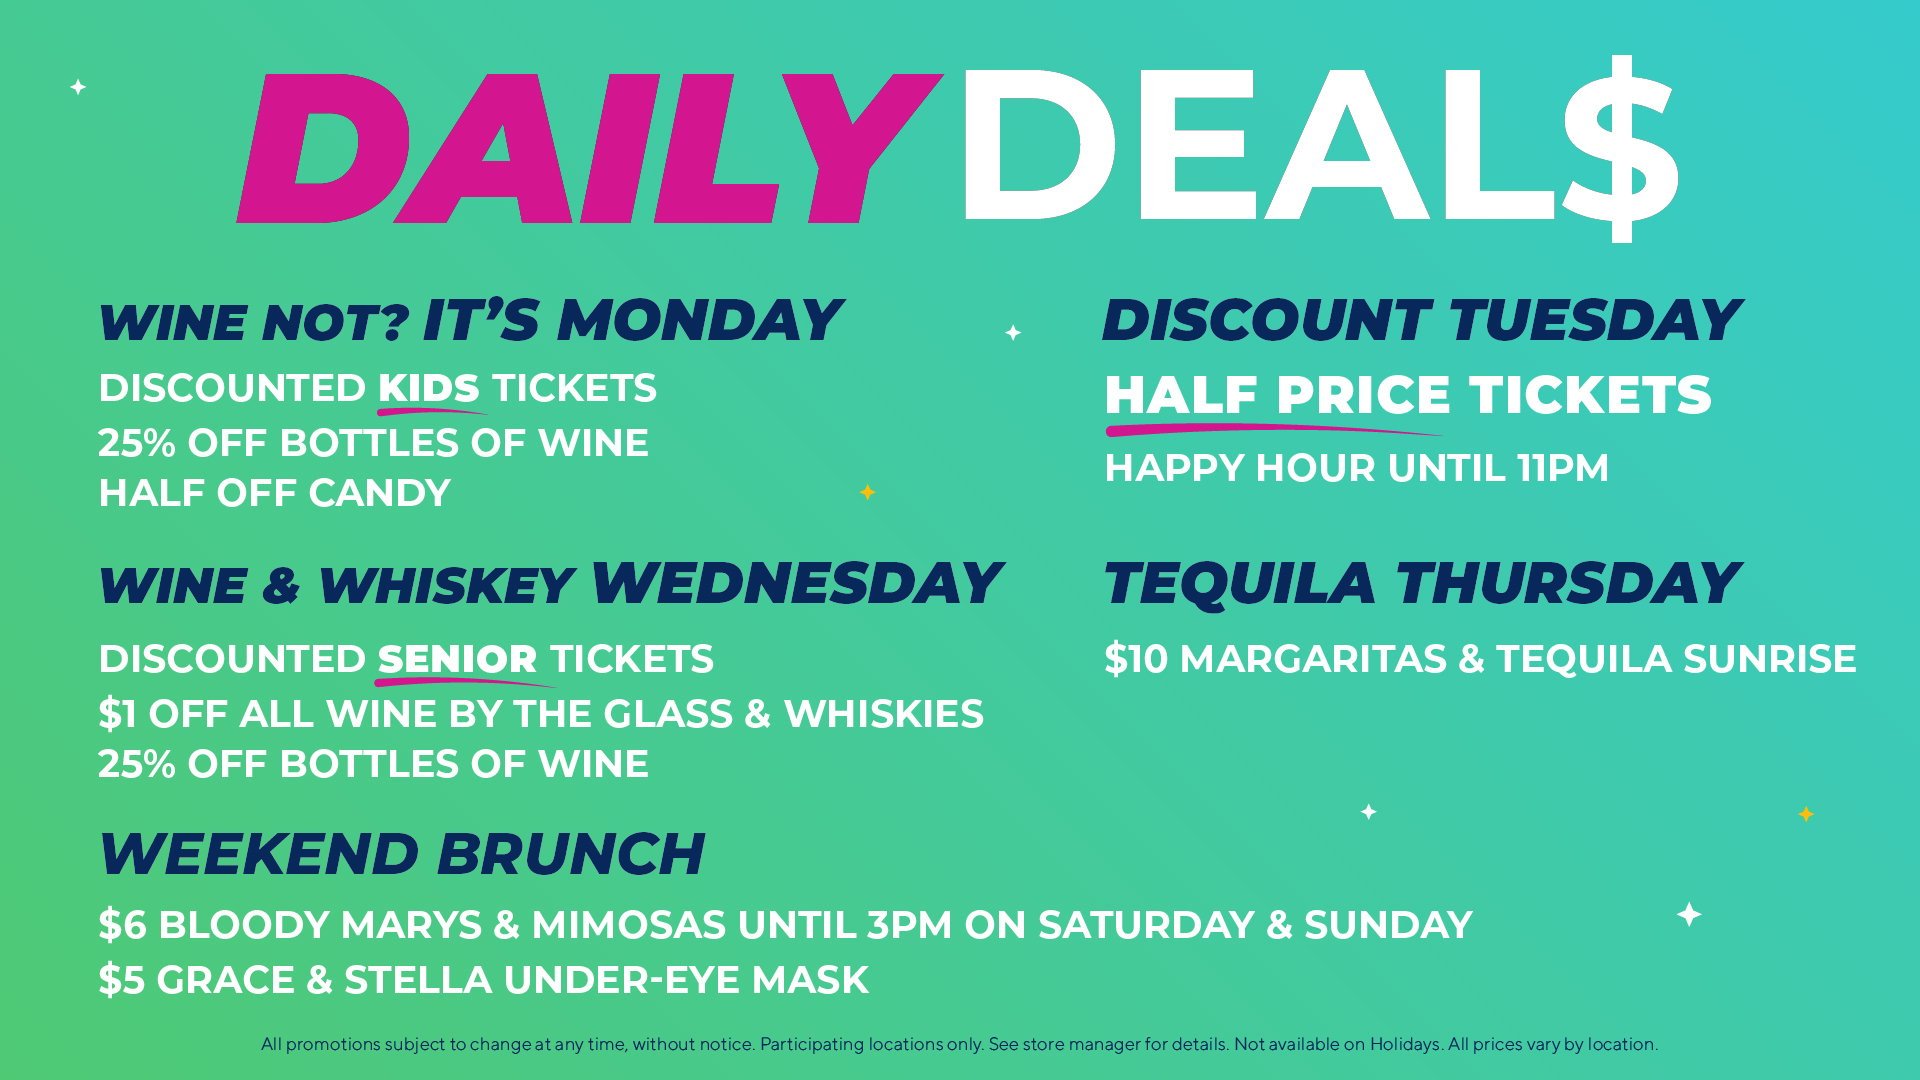 Enjoy great deals every day of the week!